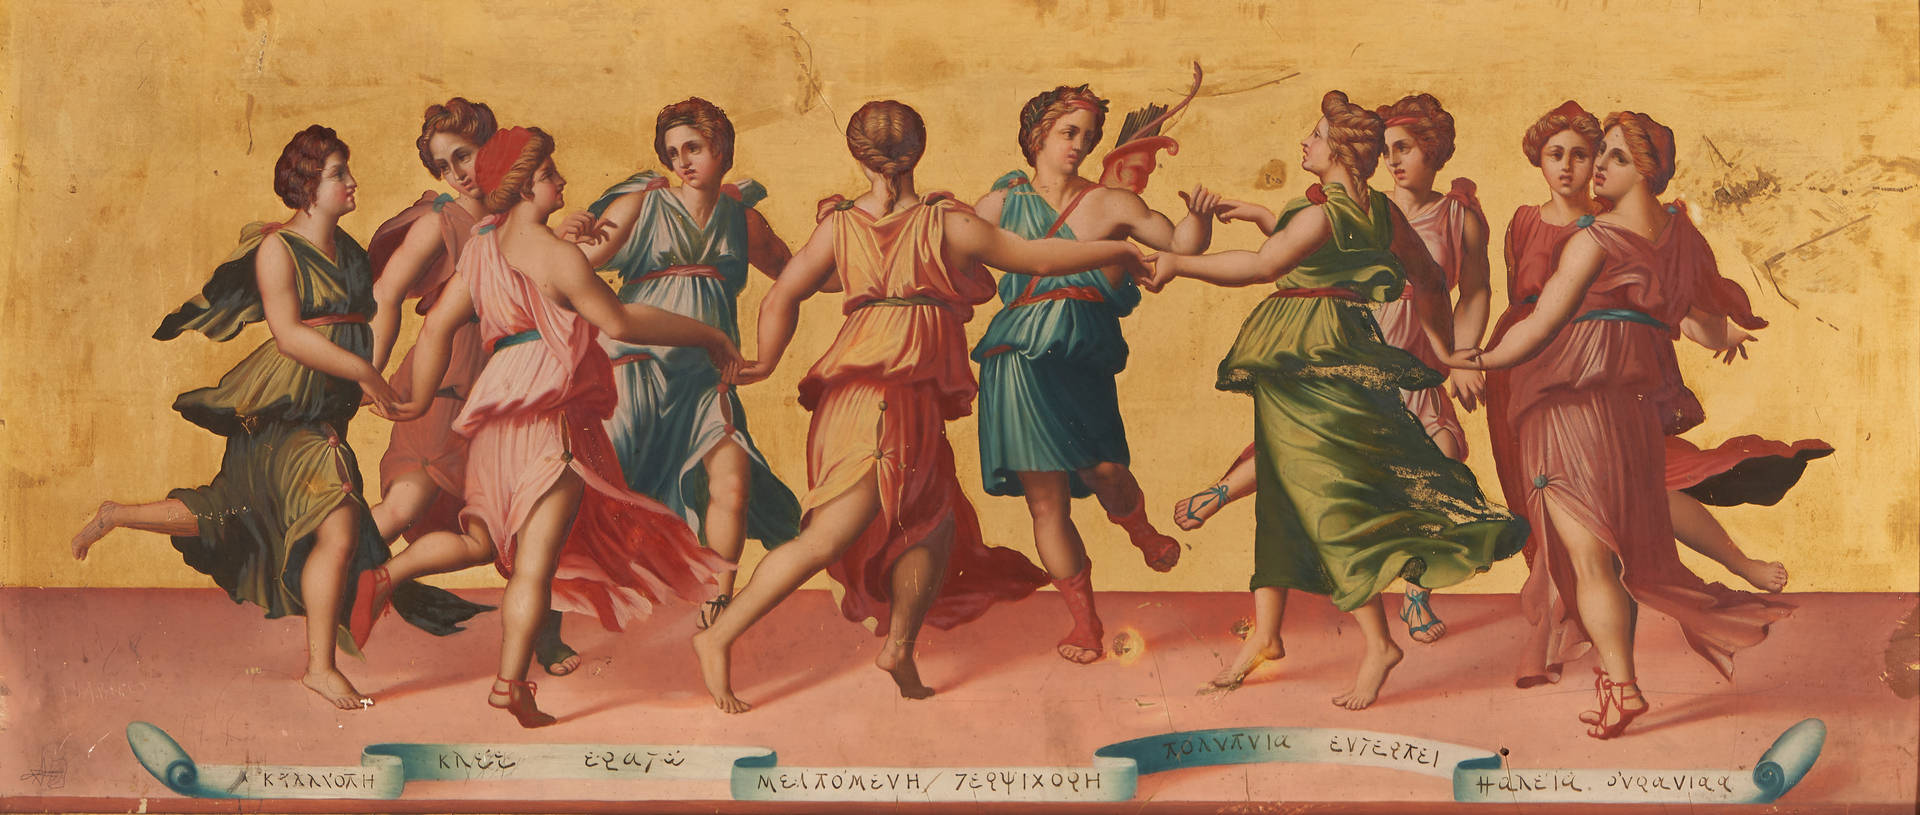 Lot 137: After Baldassare Peruzzi Gilt Panel, "Apollo Dancing with the Nine Muses"